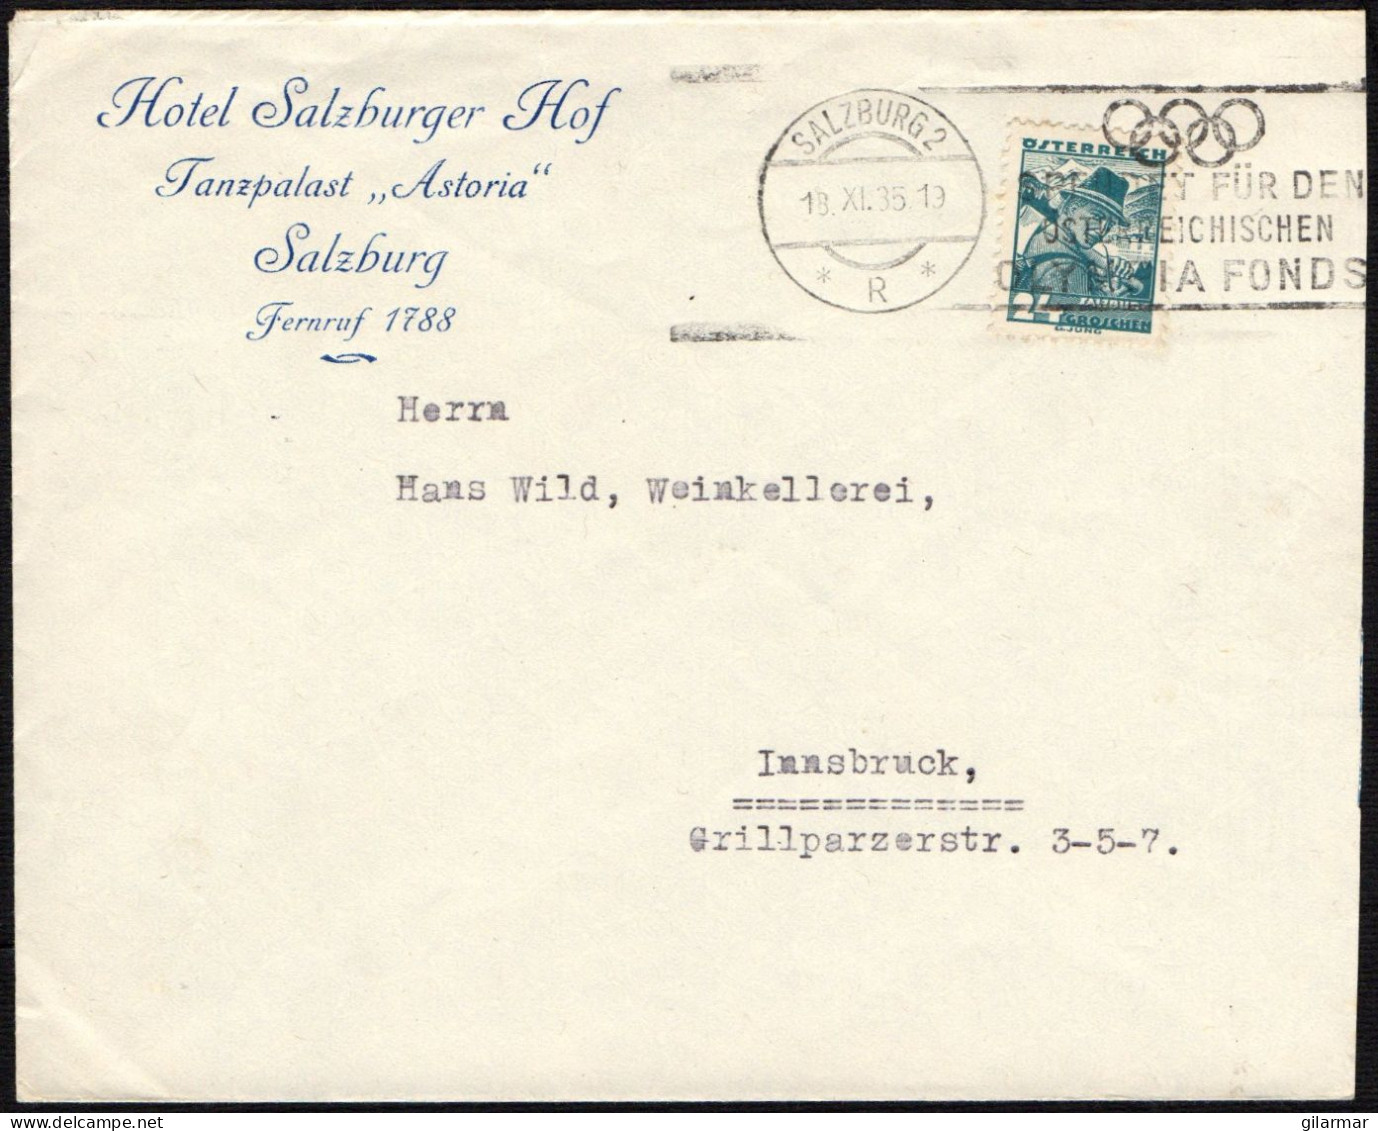 OLYMPIC GAMES 1936 - AUSTRIA SALZBURG 1935 - DONATE TO THE AUSTRIAN OLYMPIC FUND - MAILED ENVELOPE - M - Summer 1936: Berlin